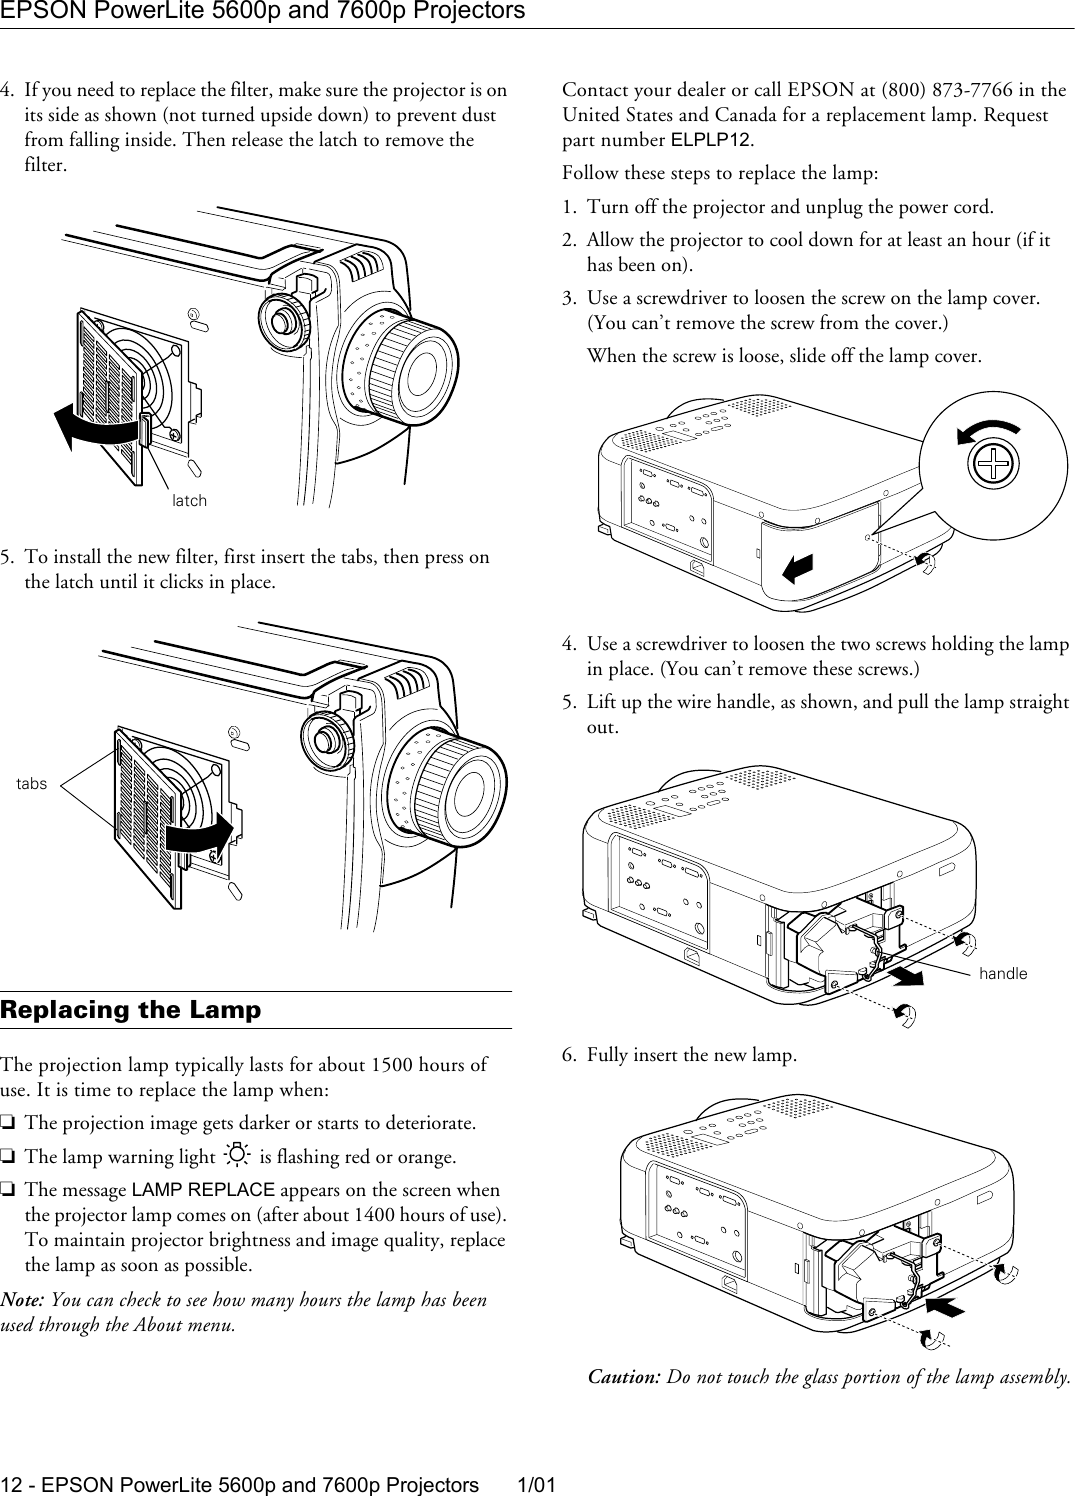 Page 10 of 11 - Epson Epson-Powerlite-5600P-Multimedia-Projector-Product-Information-Guide- PowerLite 5600p / 7600p - Product Information Guide  Epson-powerlite-5600p-multimedia-projector-product-information-guide